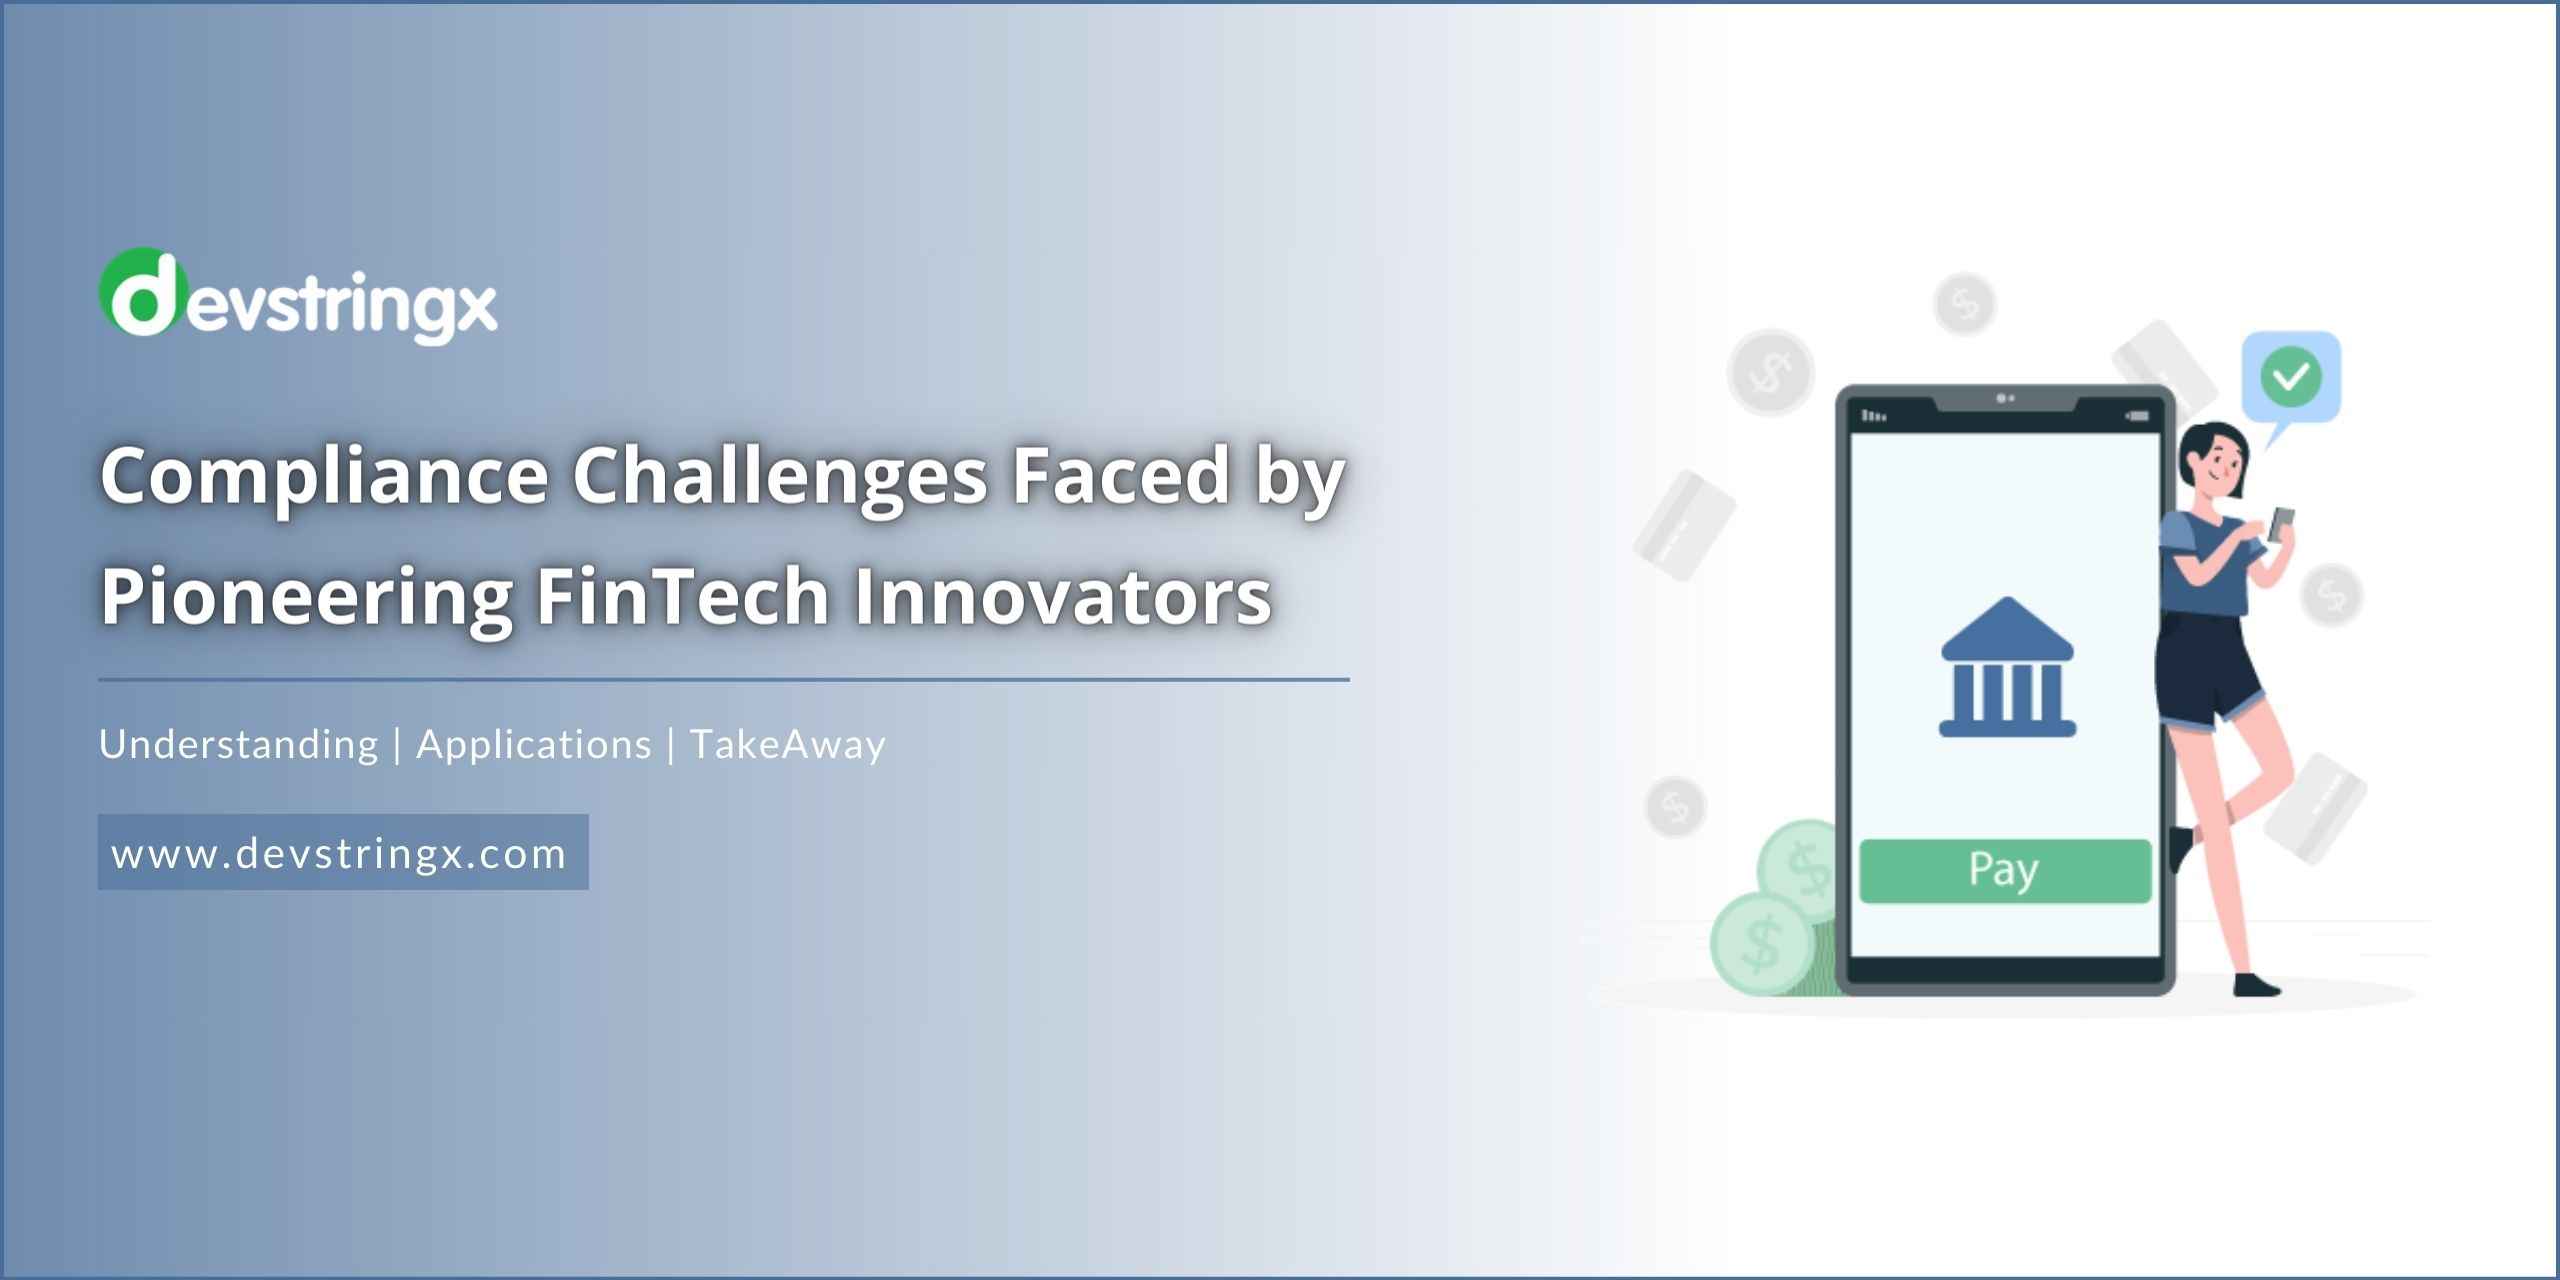 Feature image for Pioneering FinTech Innovators blog